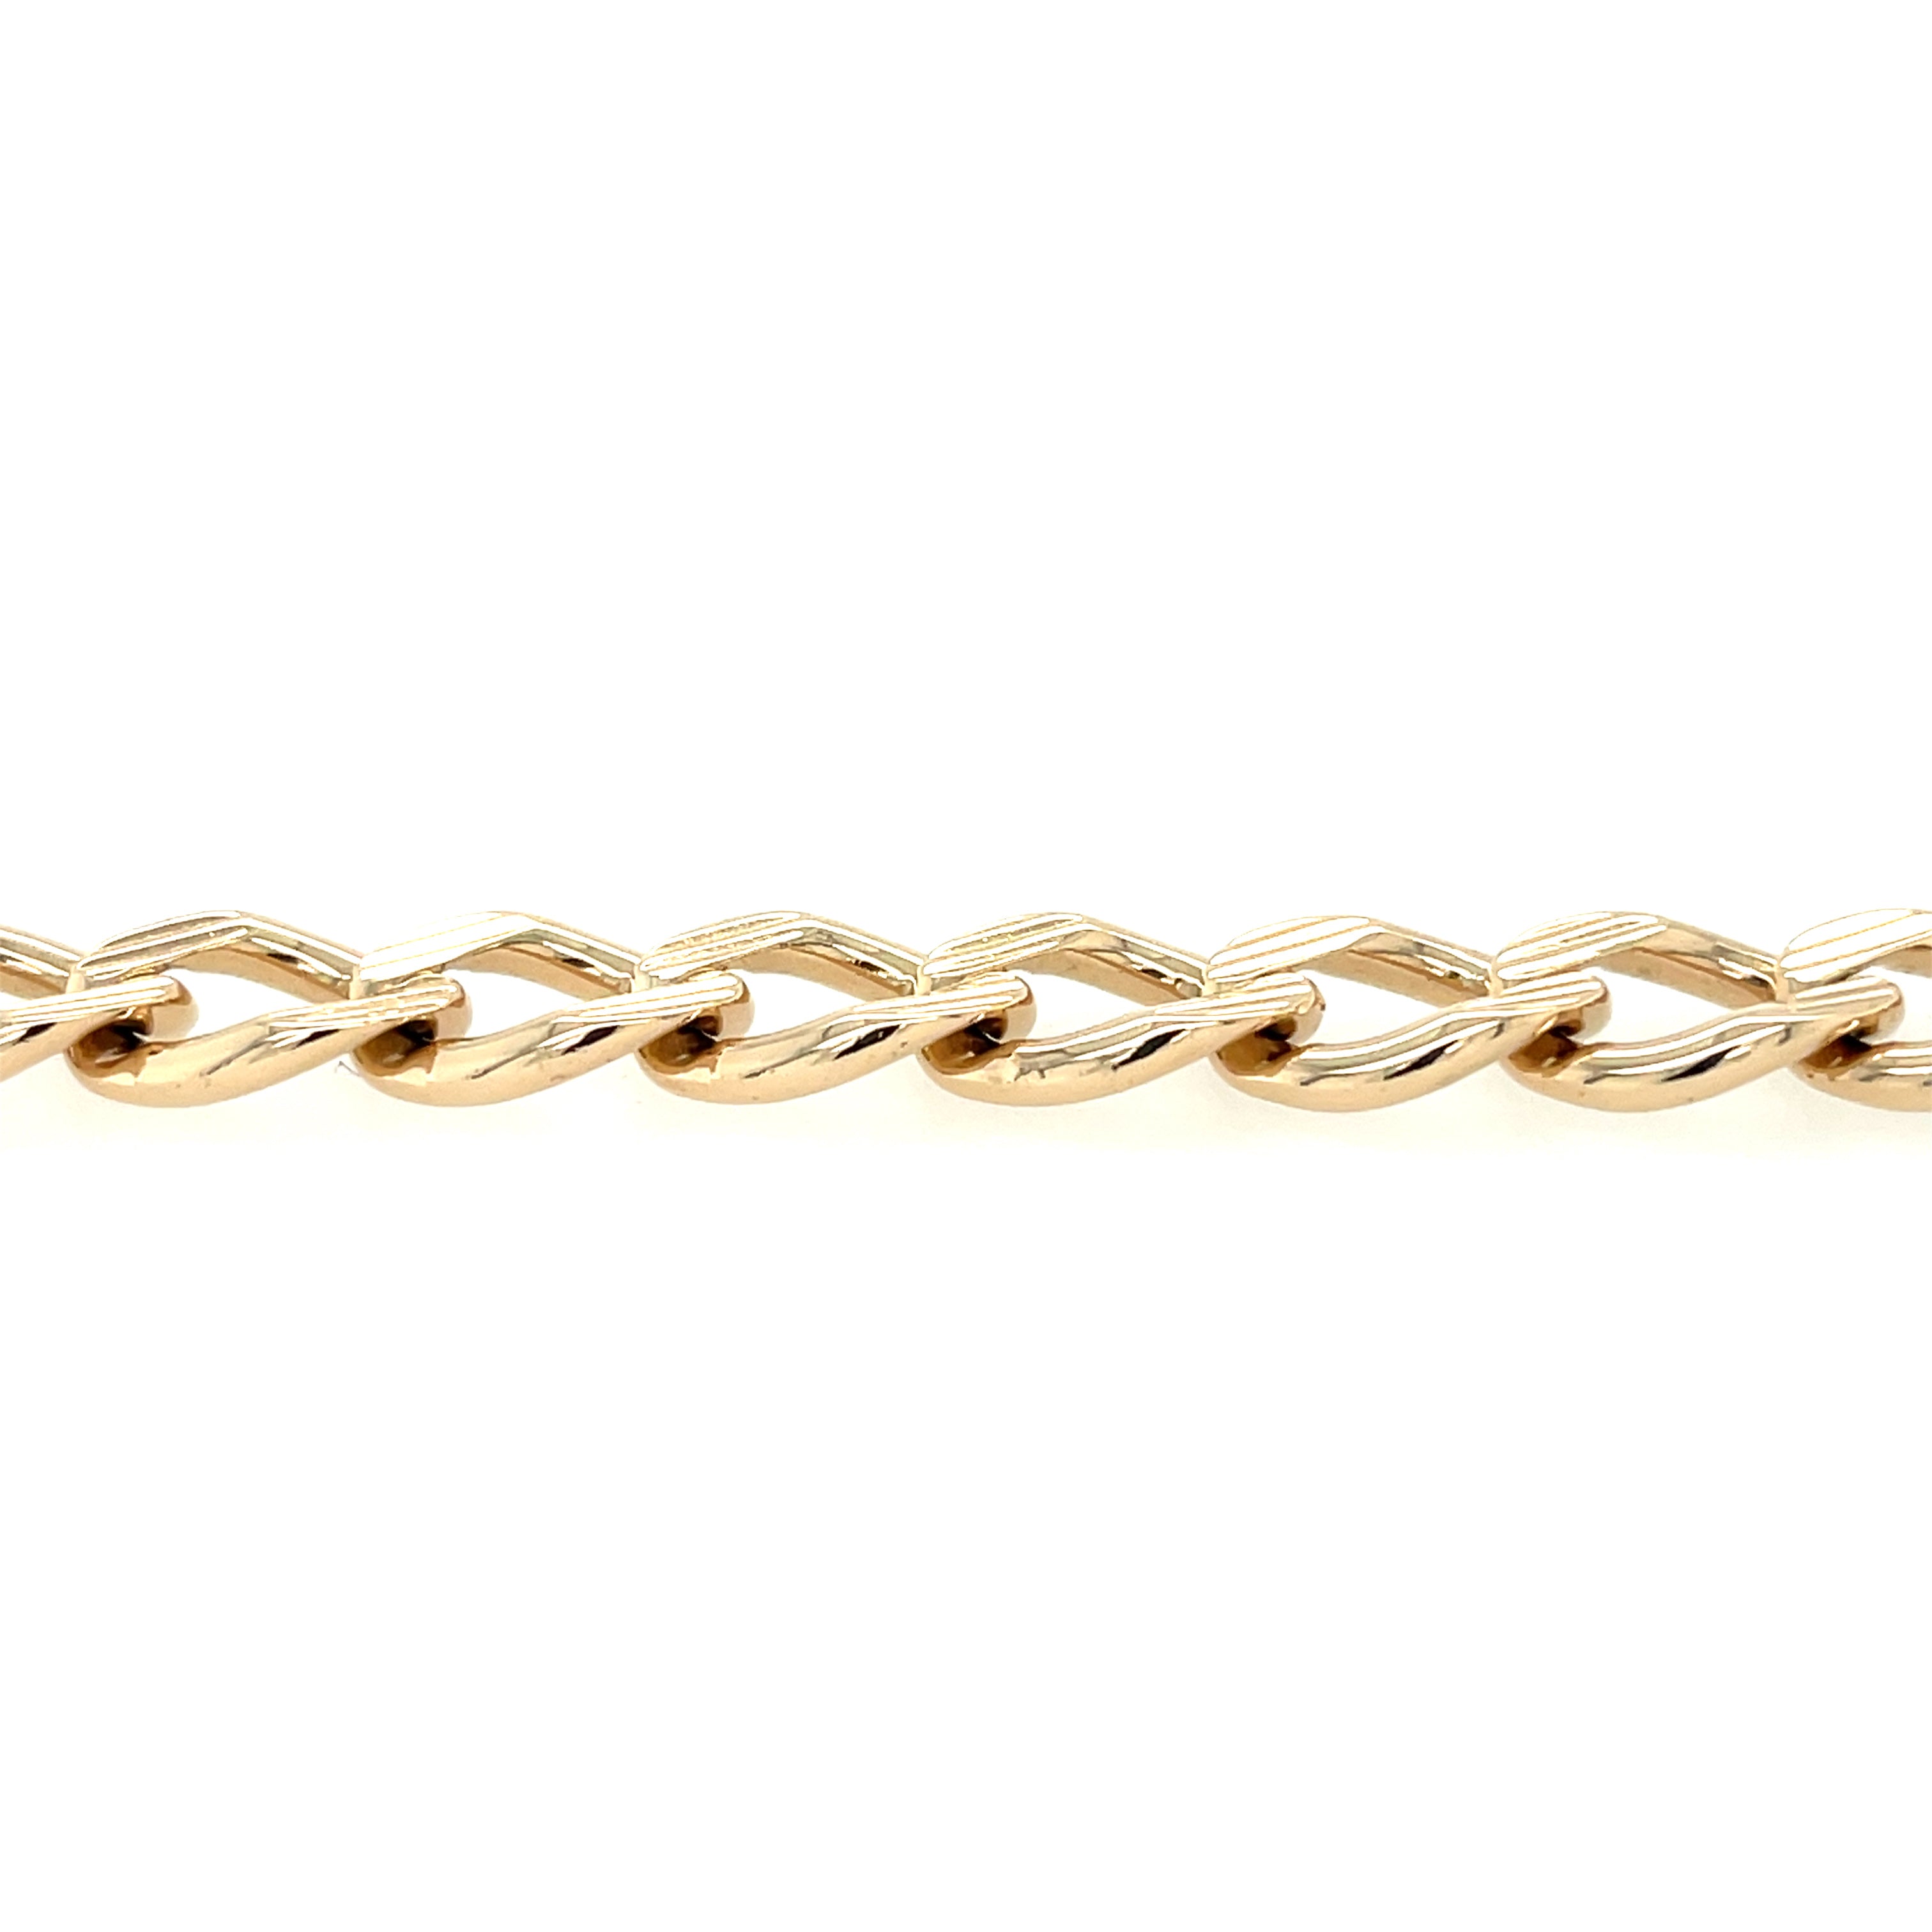 9ct Yellow Gold Vintage 9 Inch Grooved Curb Link Bracelet - 23.84g